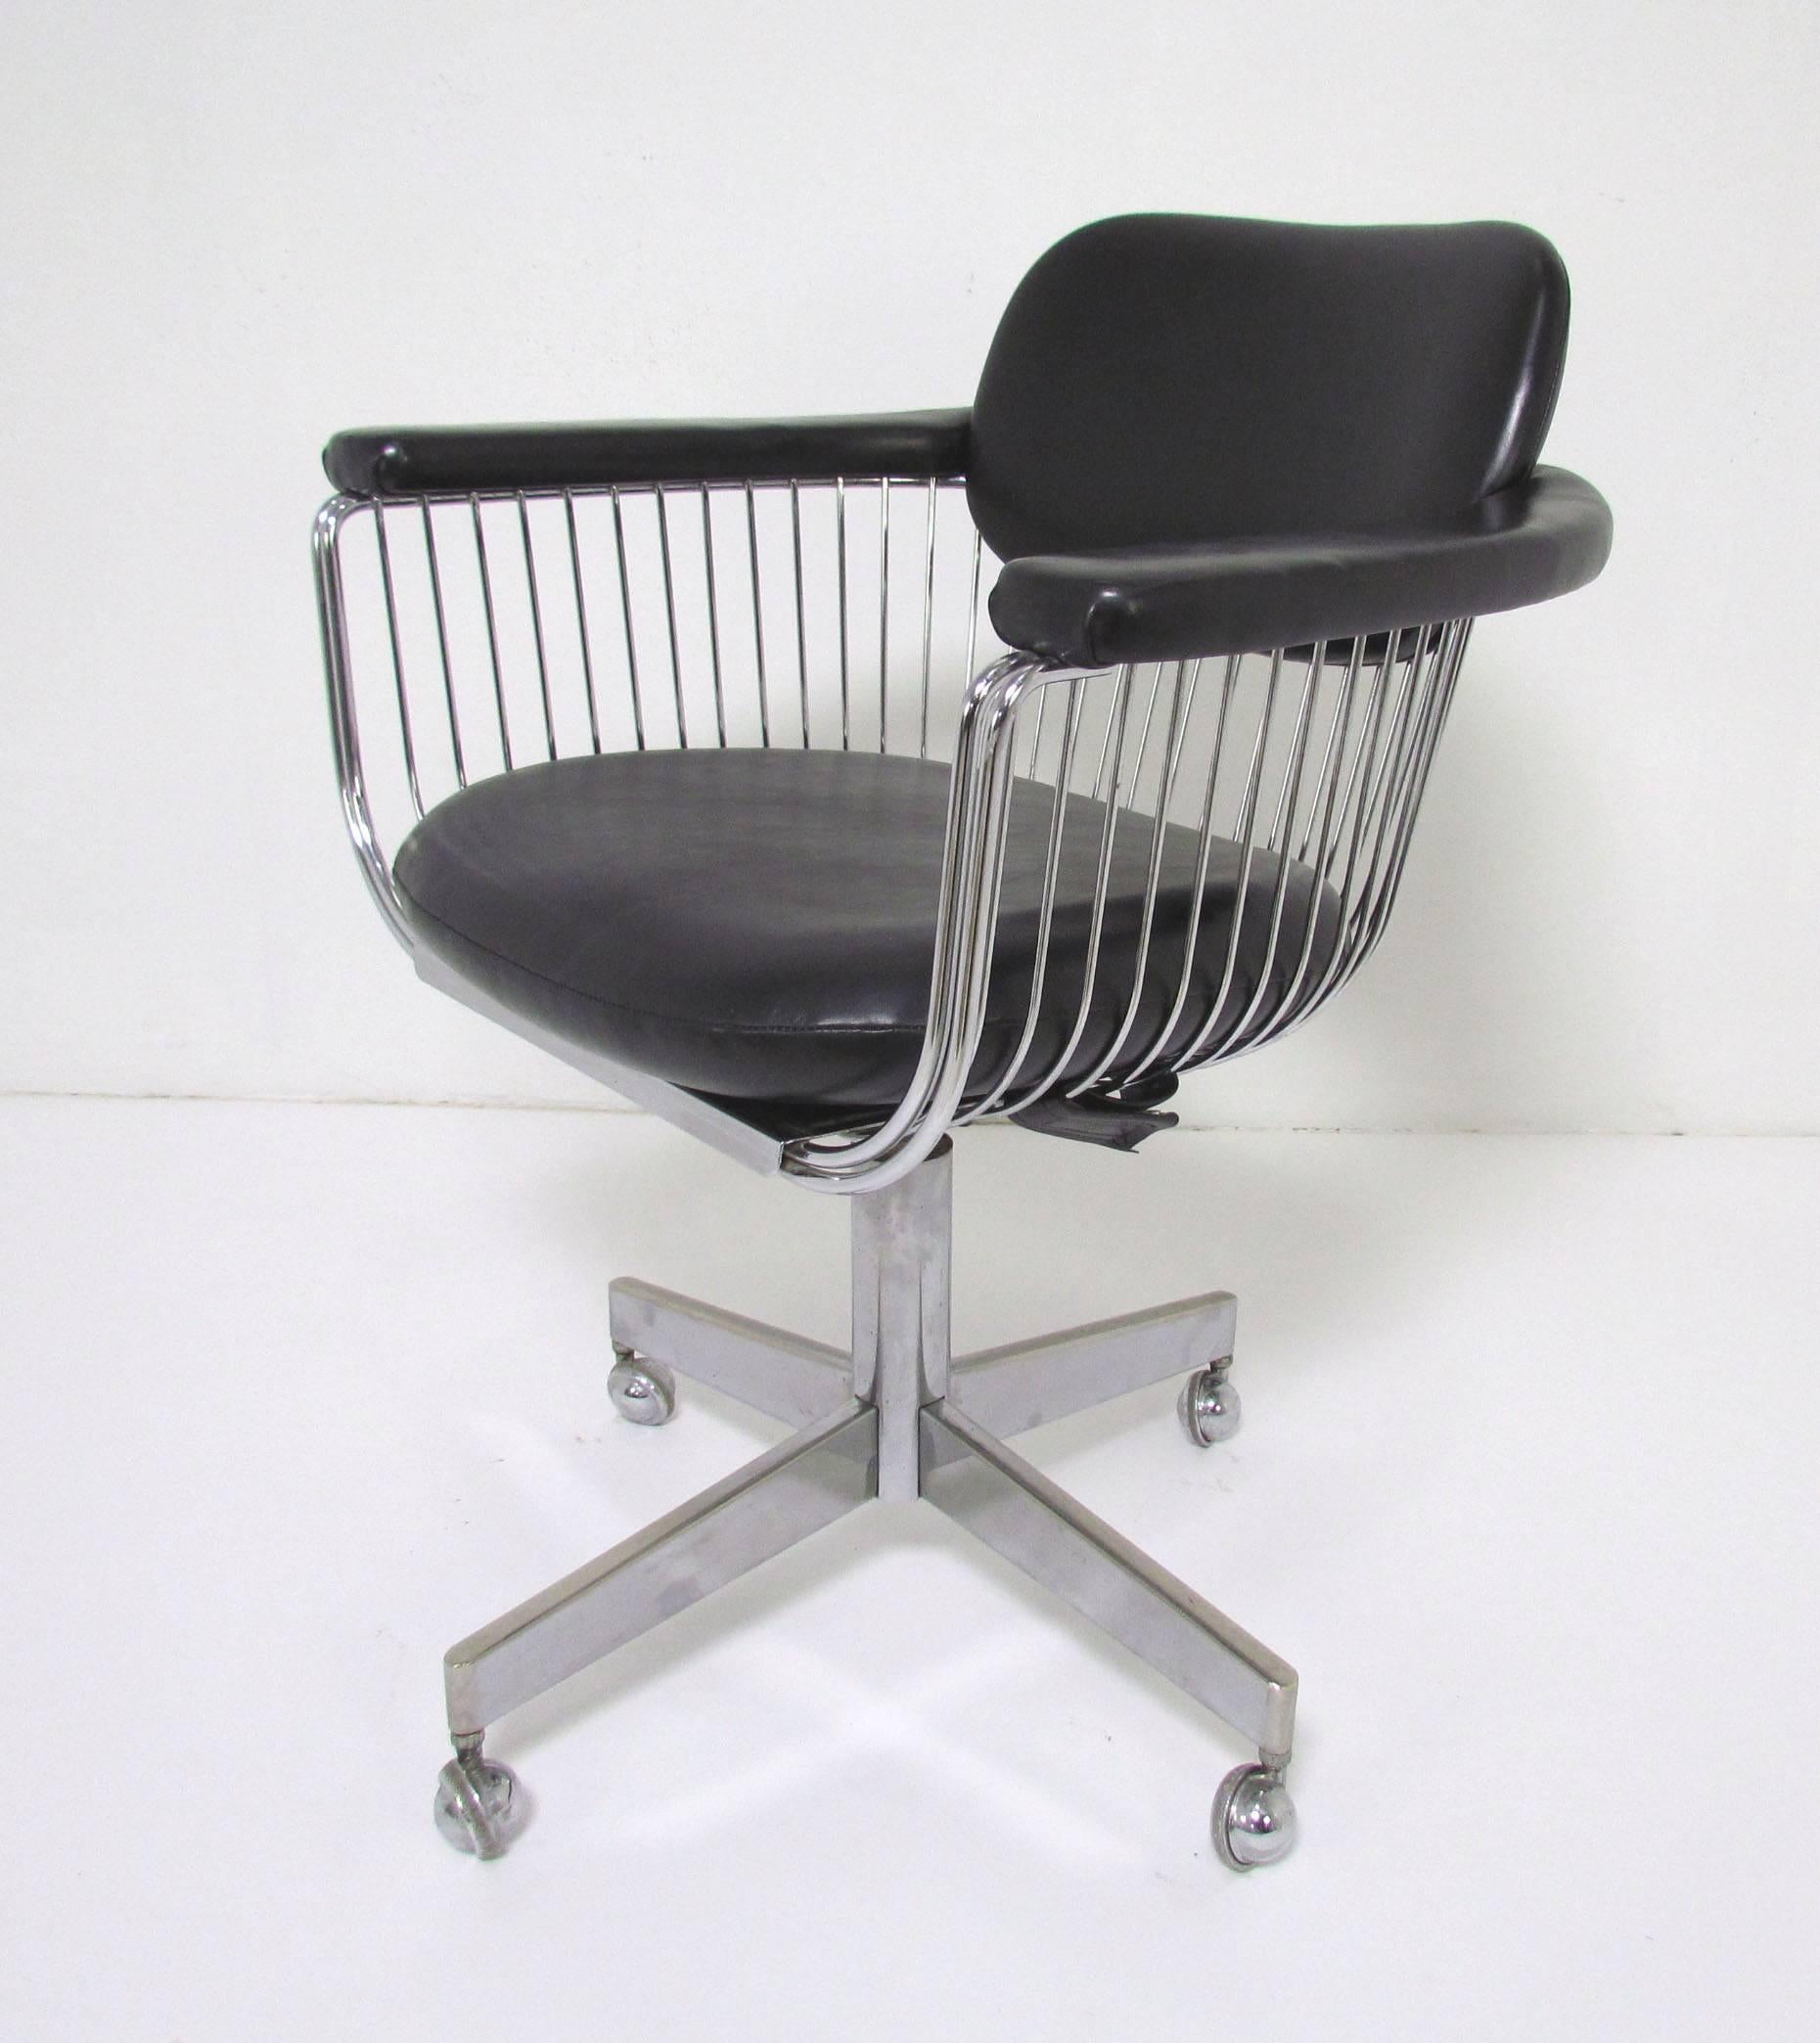 Stylish Mid-Century Modern desk chair, features swivel seat on a four-leg base with casters. Unknown make, circa 1960s. The elegant chrome wirework presents a styling reminiscent of the designs of Warren Platner. Measures: Seat height 19